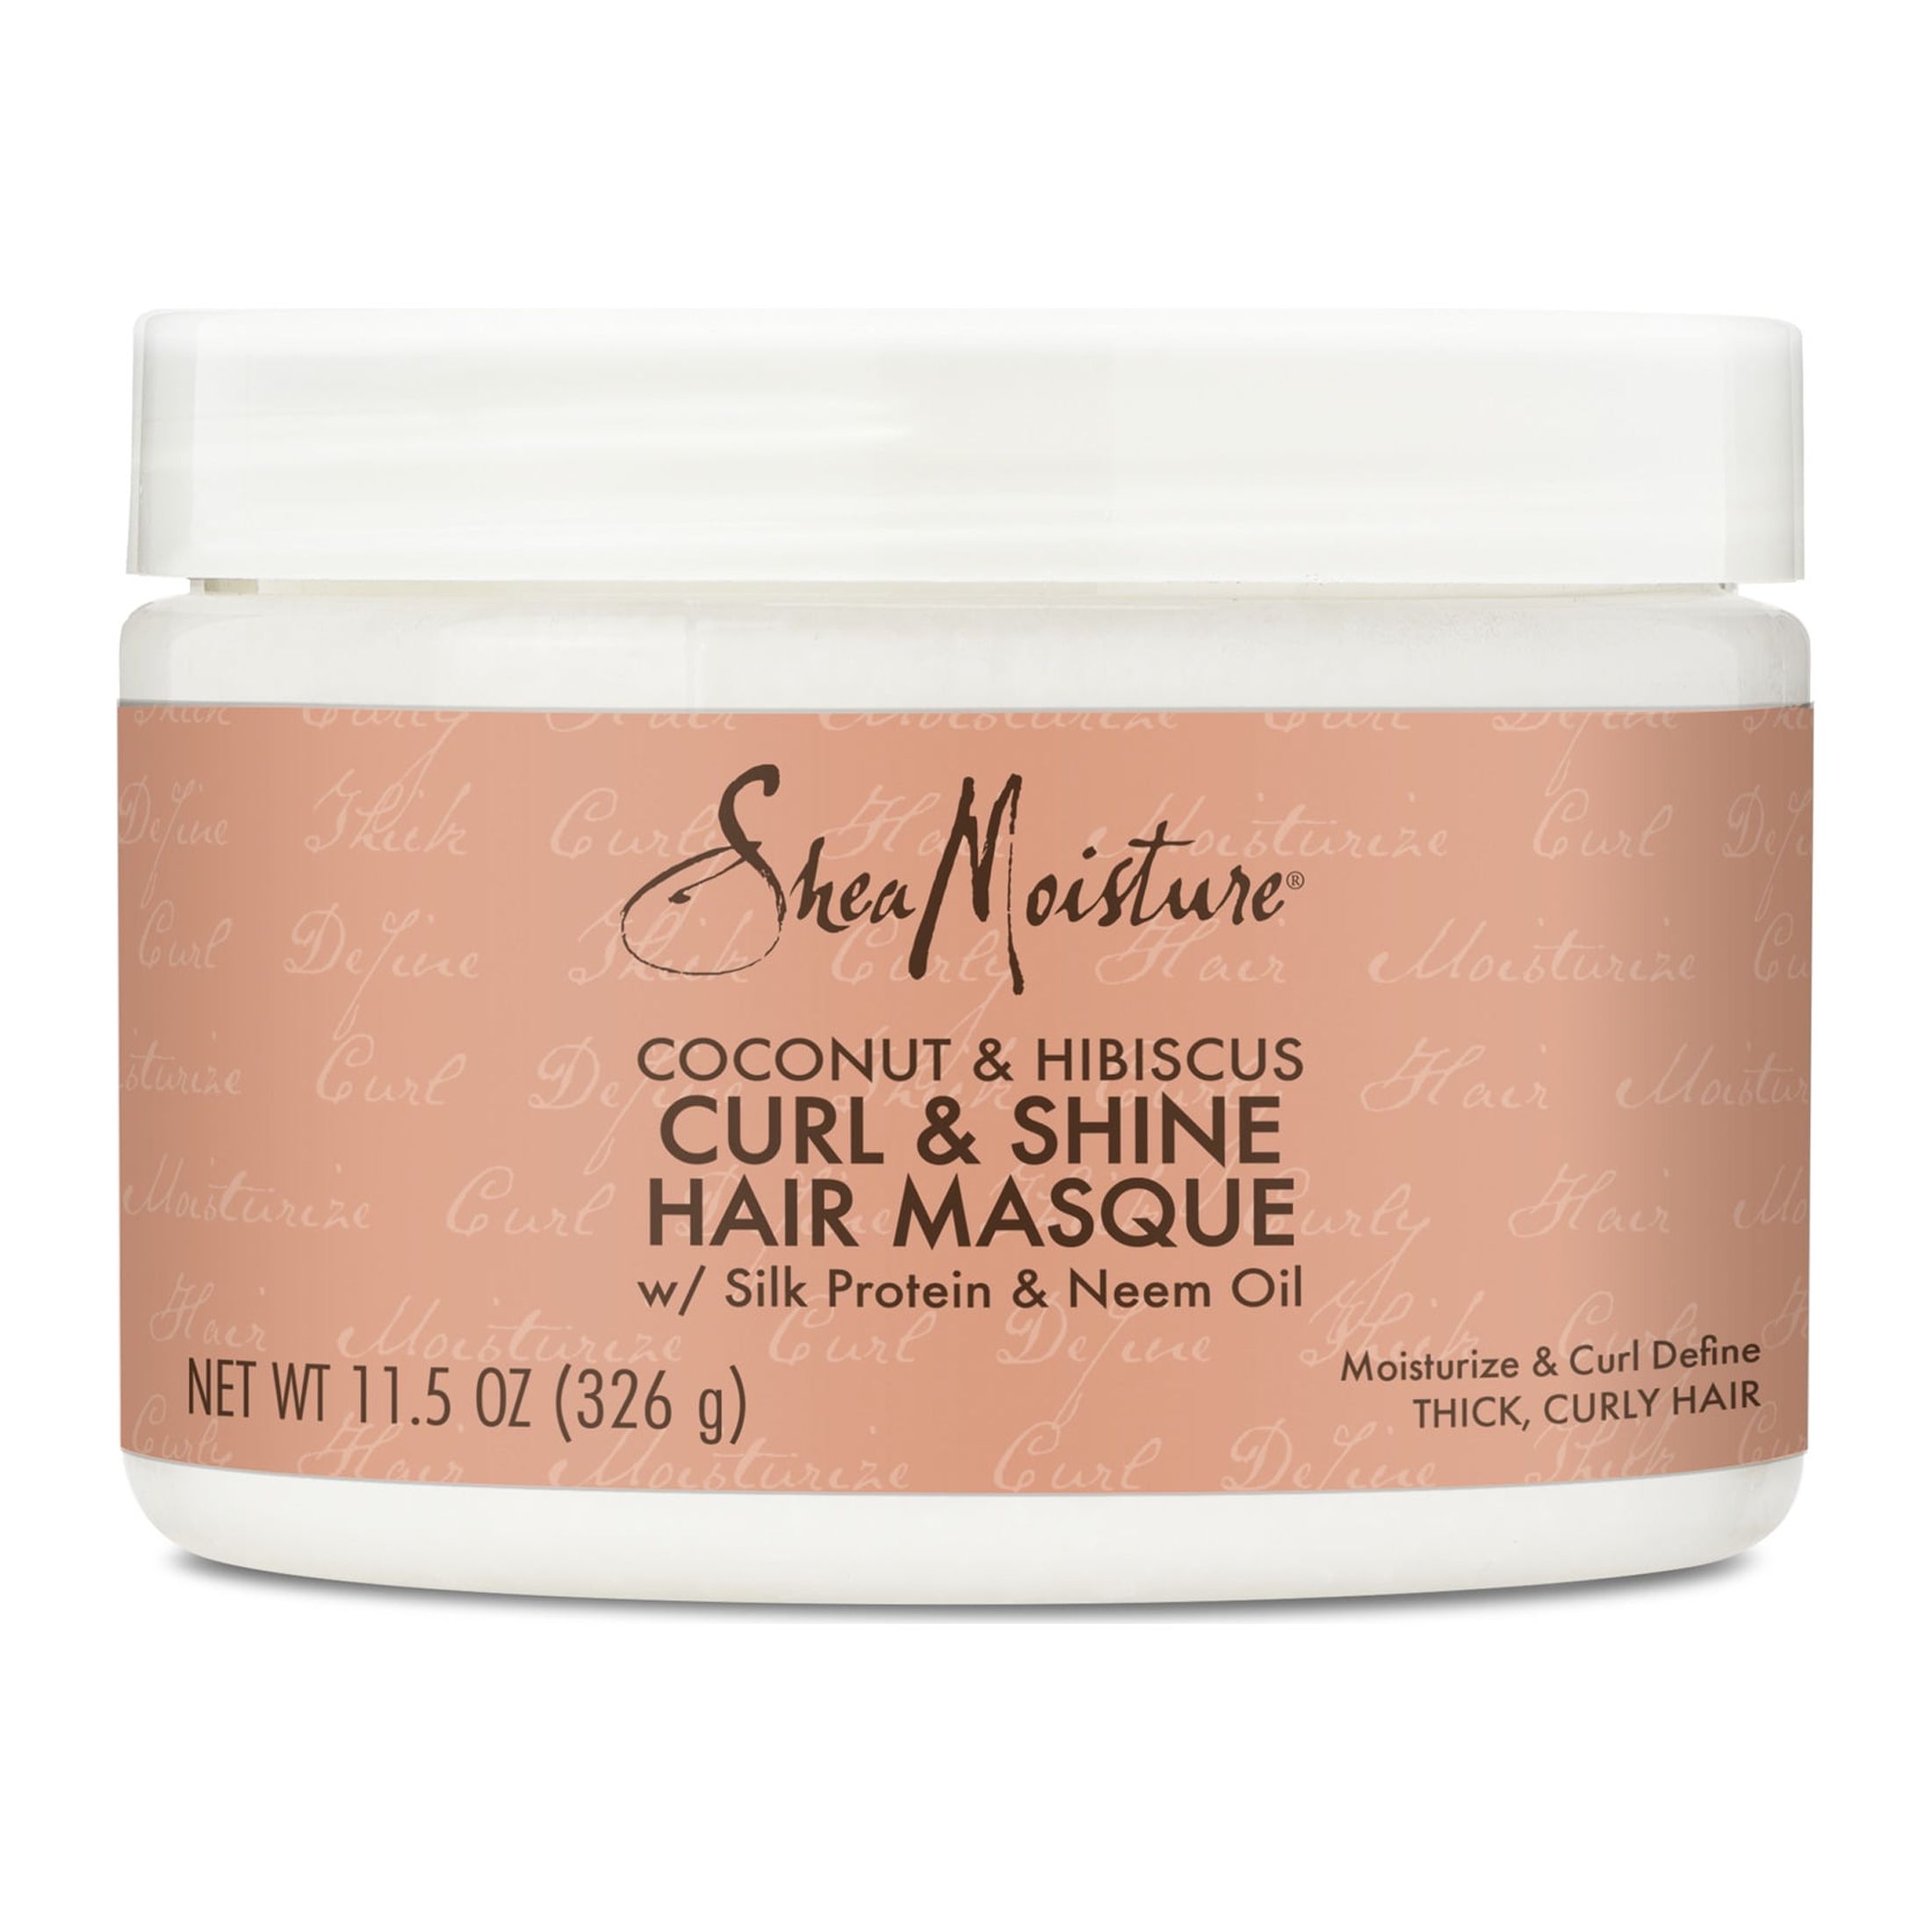 SheaMoisture Curl and Shine Hair Mask with Shea Butter, Coconut and Hibiscus, 11.5 oz - image 1 of 7